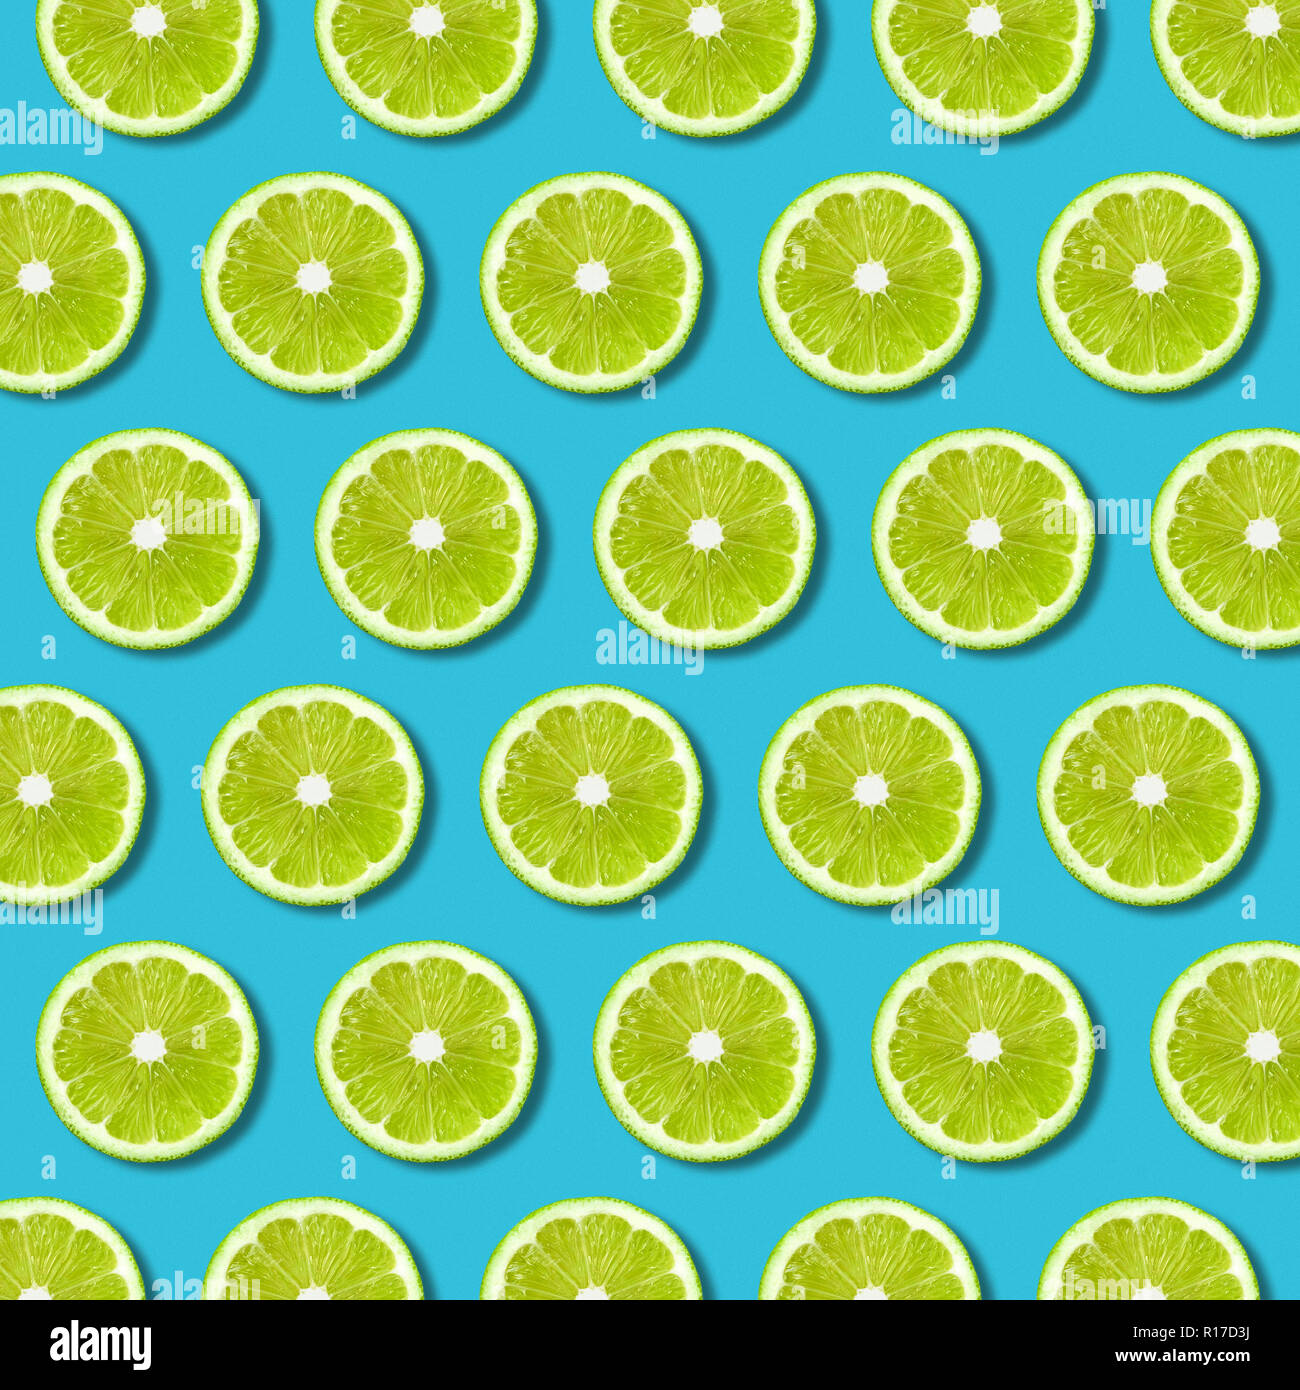 Green lime slices pattern on vibrant turquoise color background. Minimal flat lay food texture Stock Photo